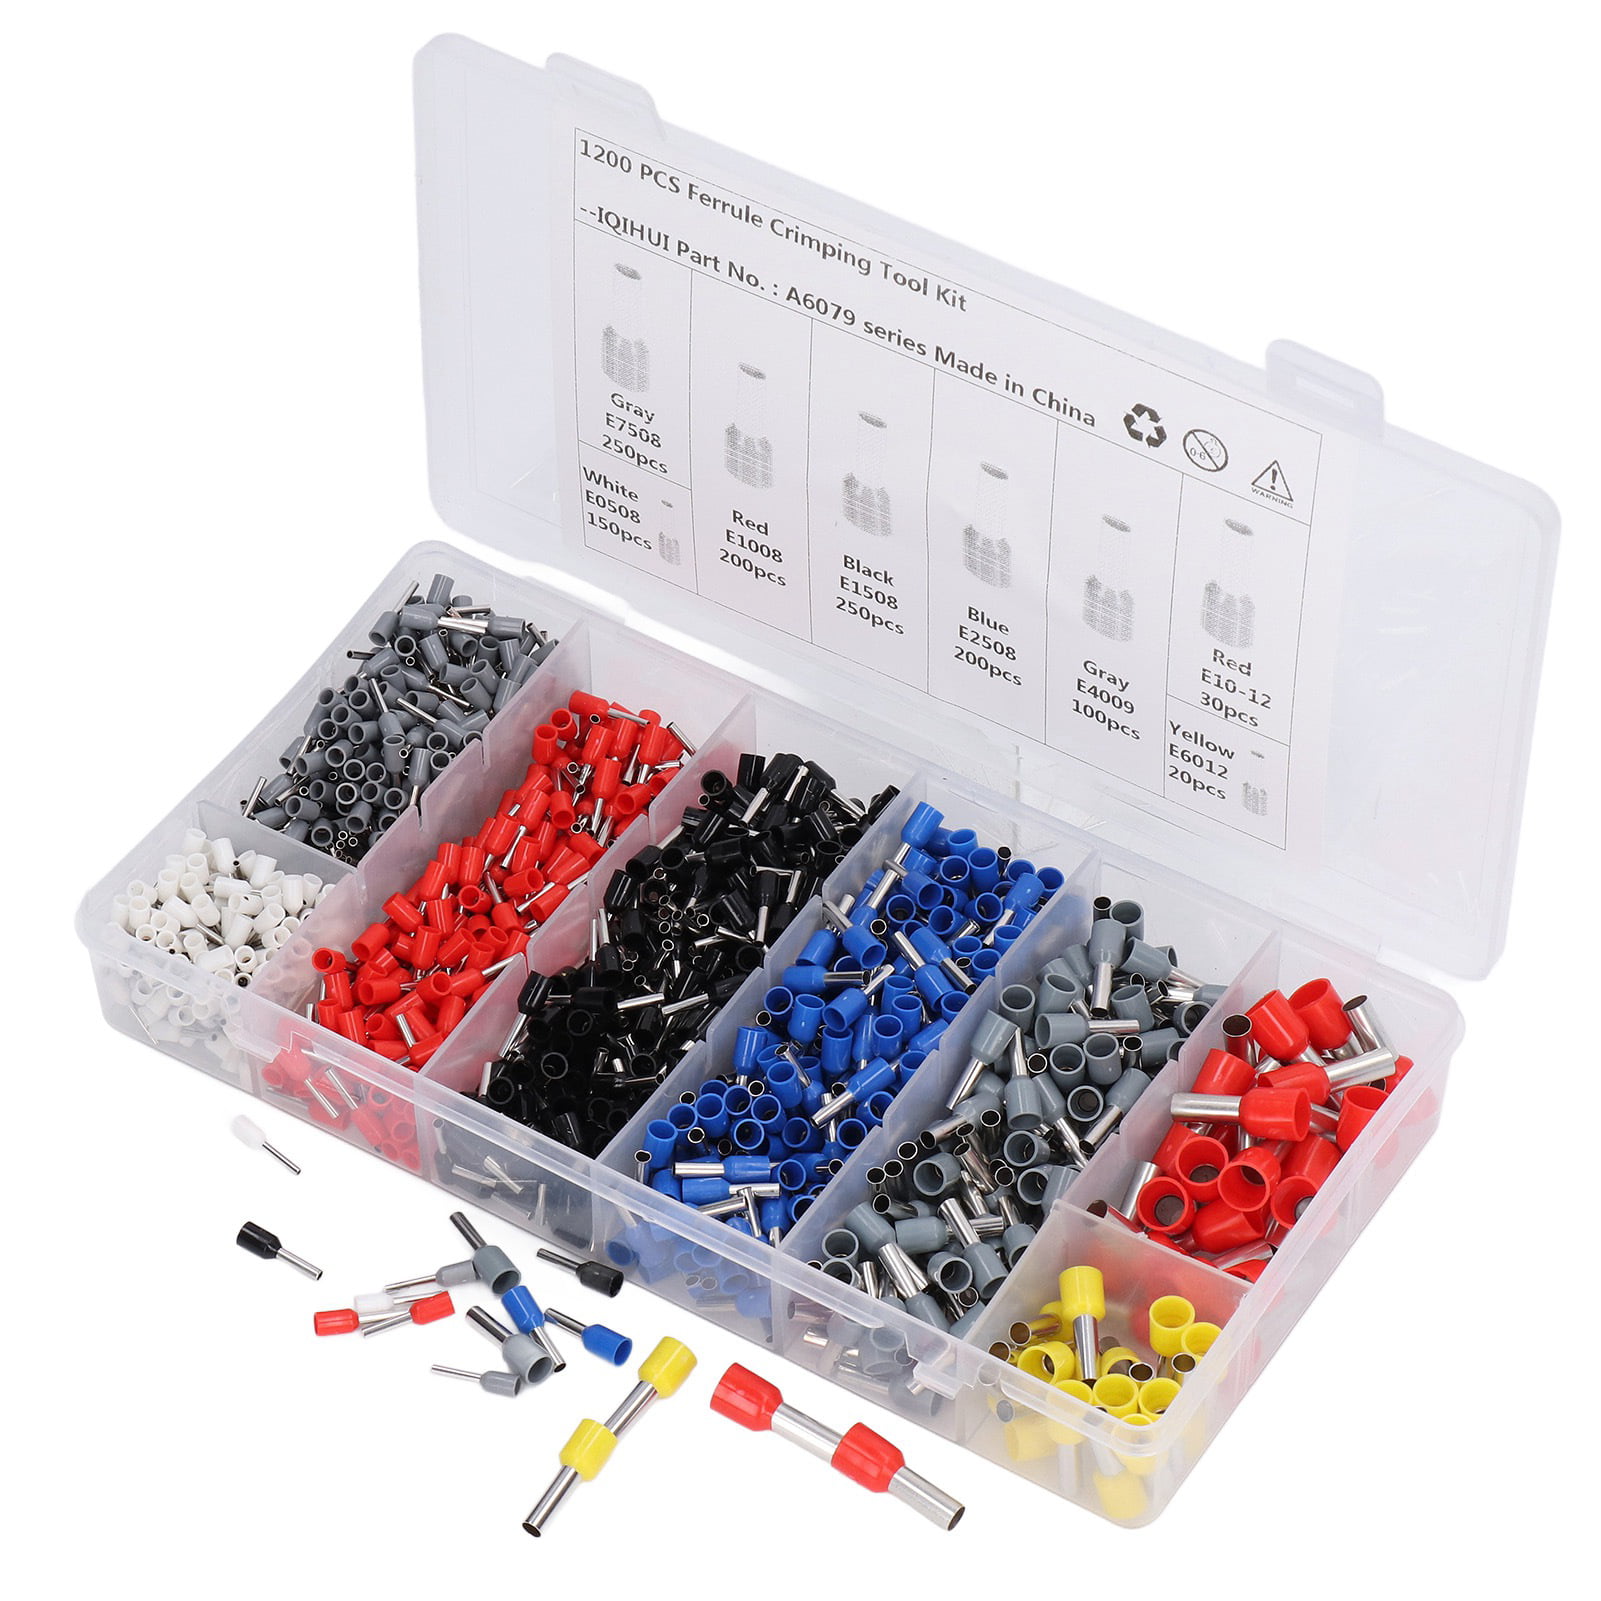 1200Pcs Insulated Assorted Electrical Wiring Connectors Crimp Terminals Set Kits 